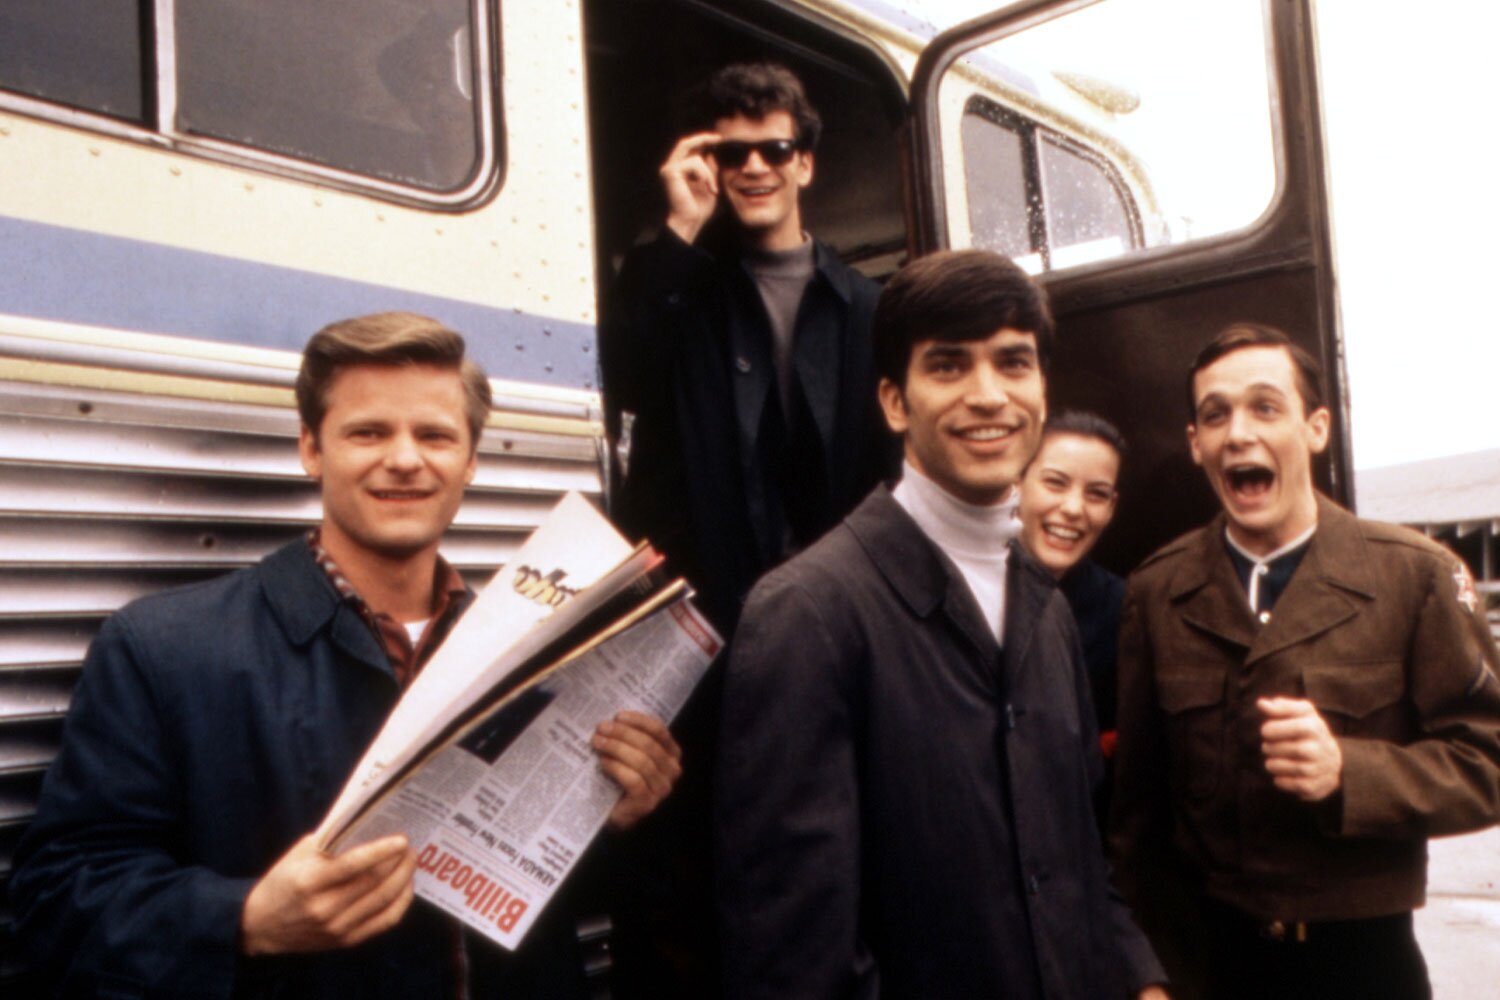 The stars of the musical "That Thing You Do!" hang out near a bus.